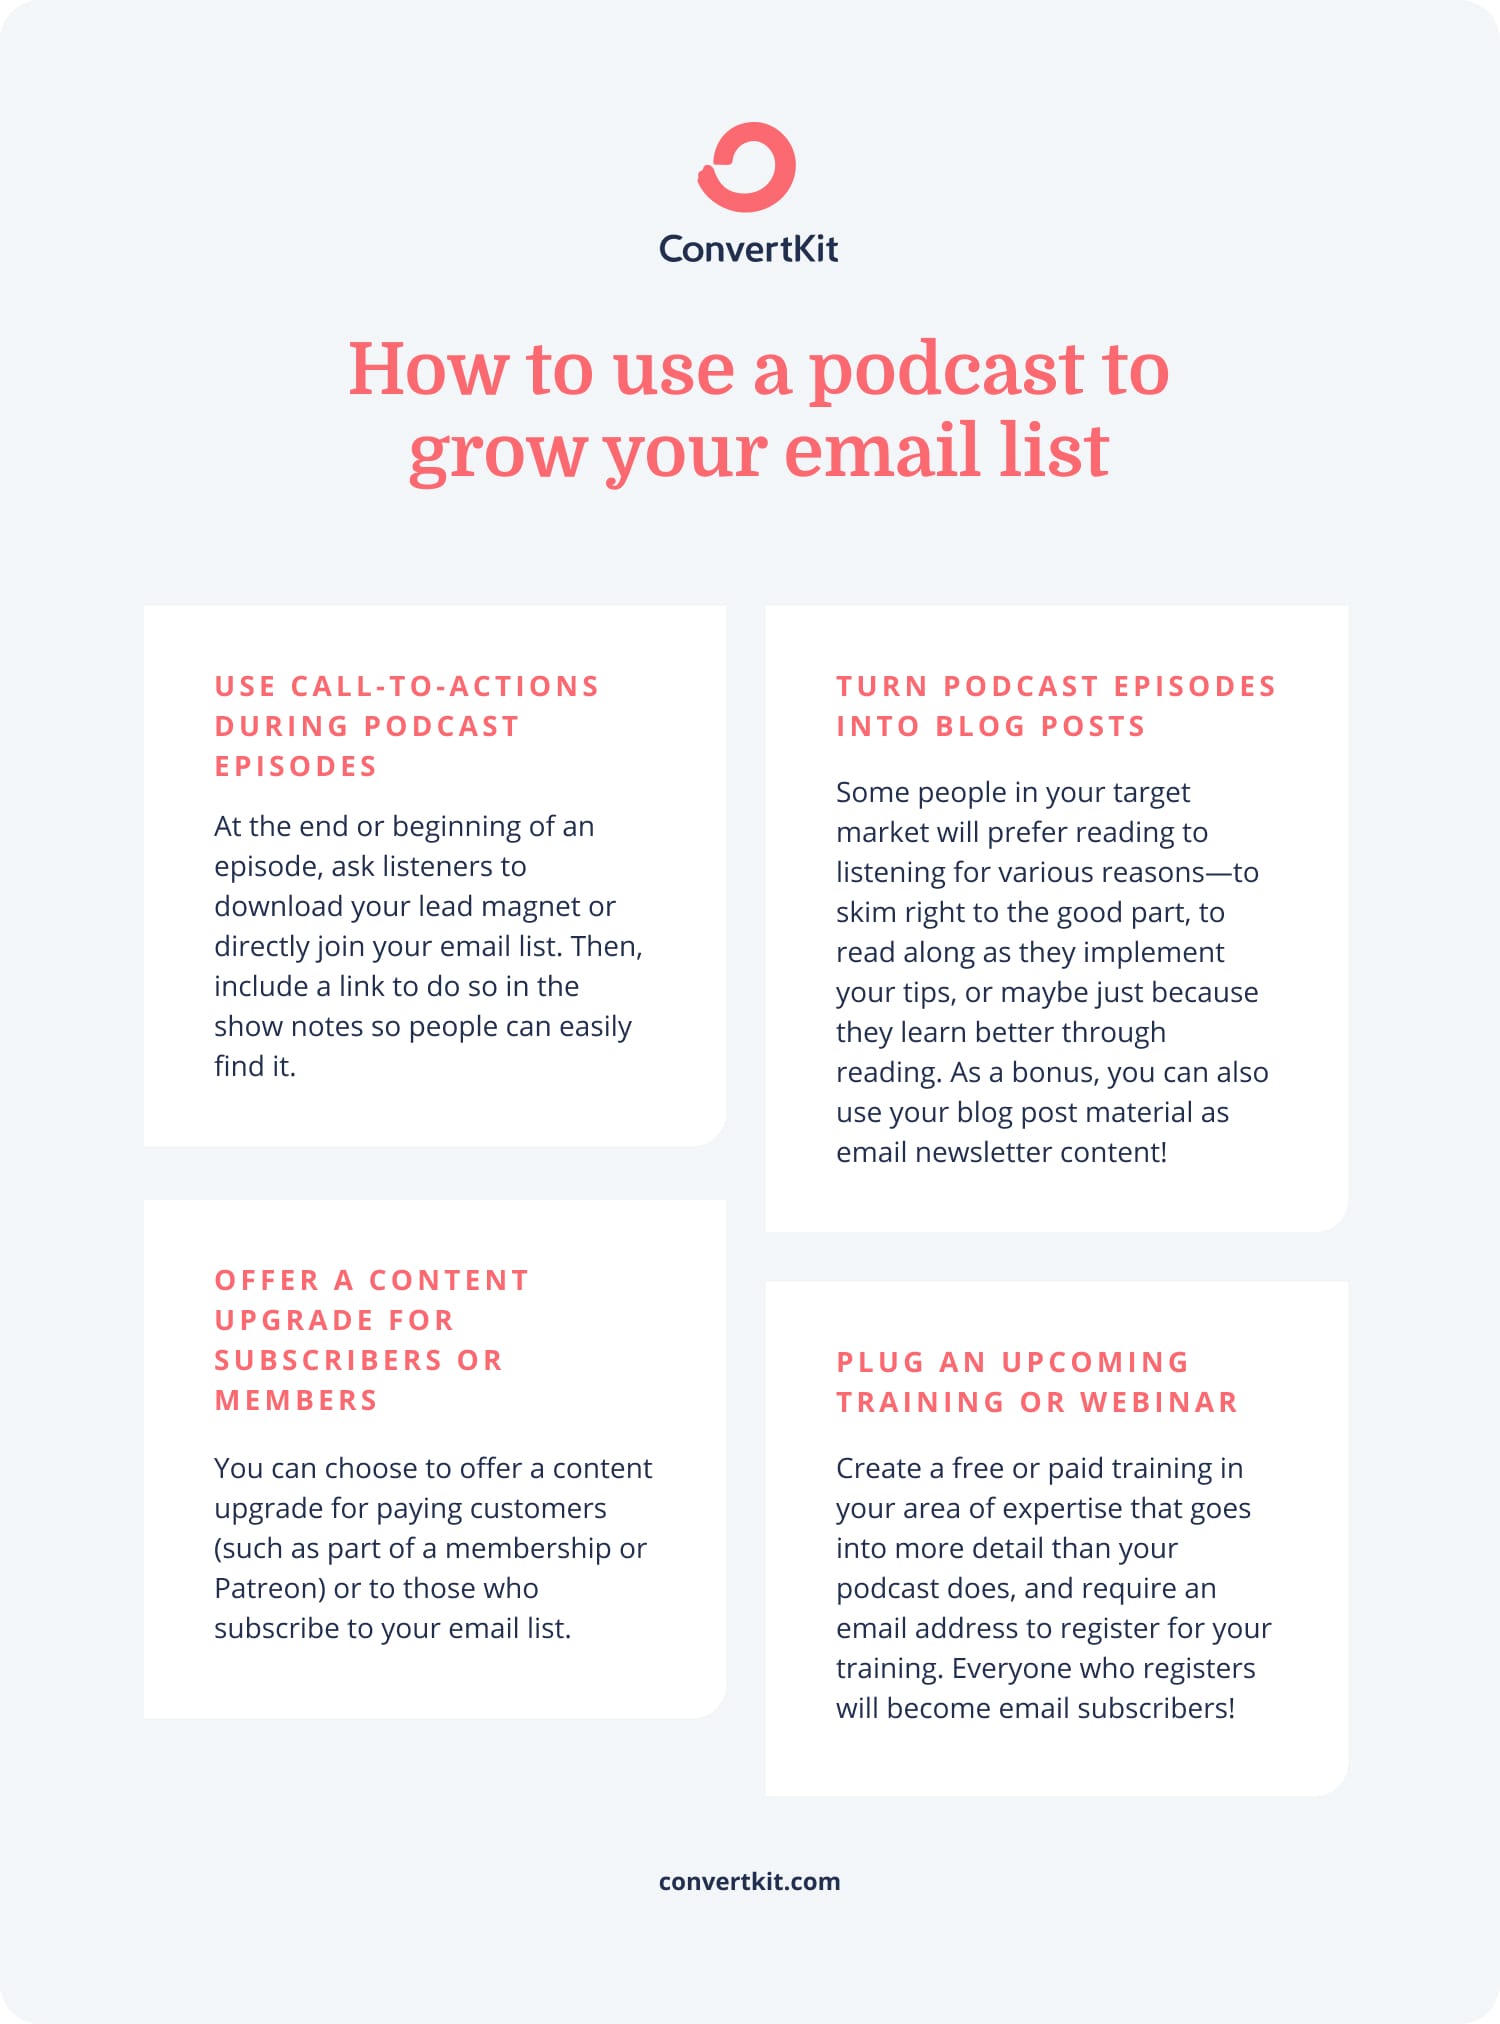 How to use a podcast to grow your email list